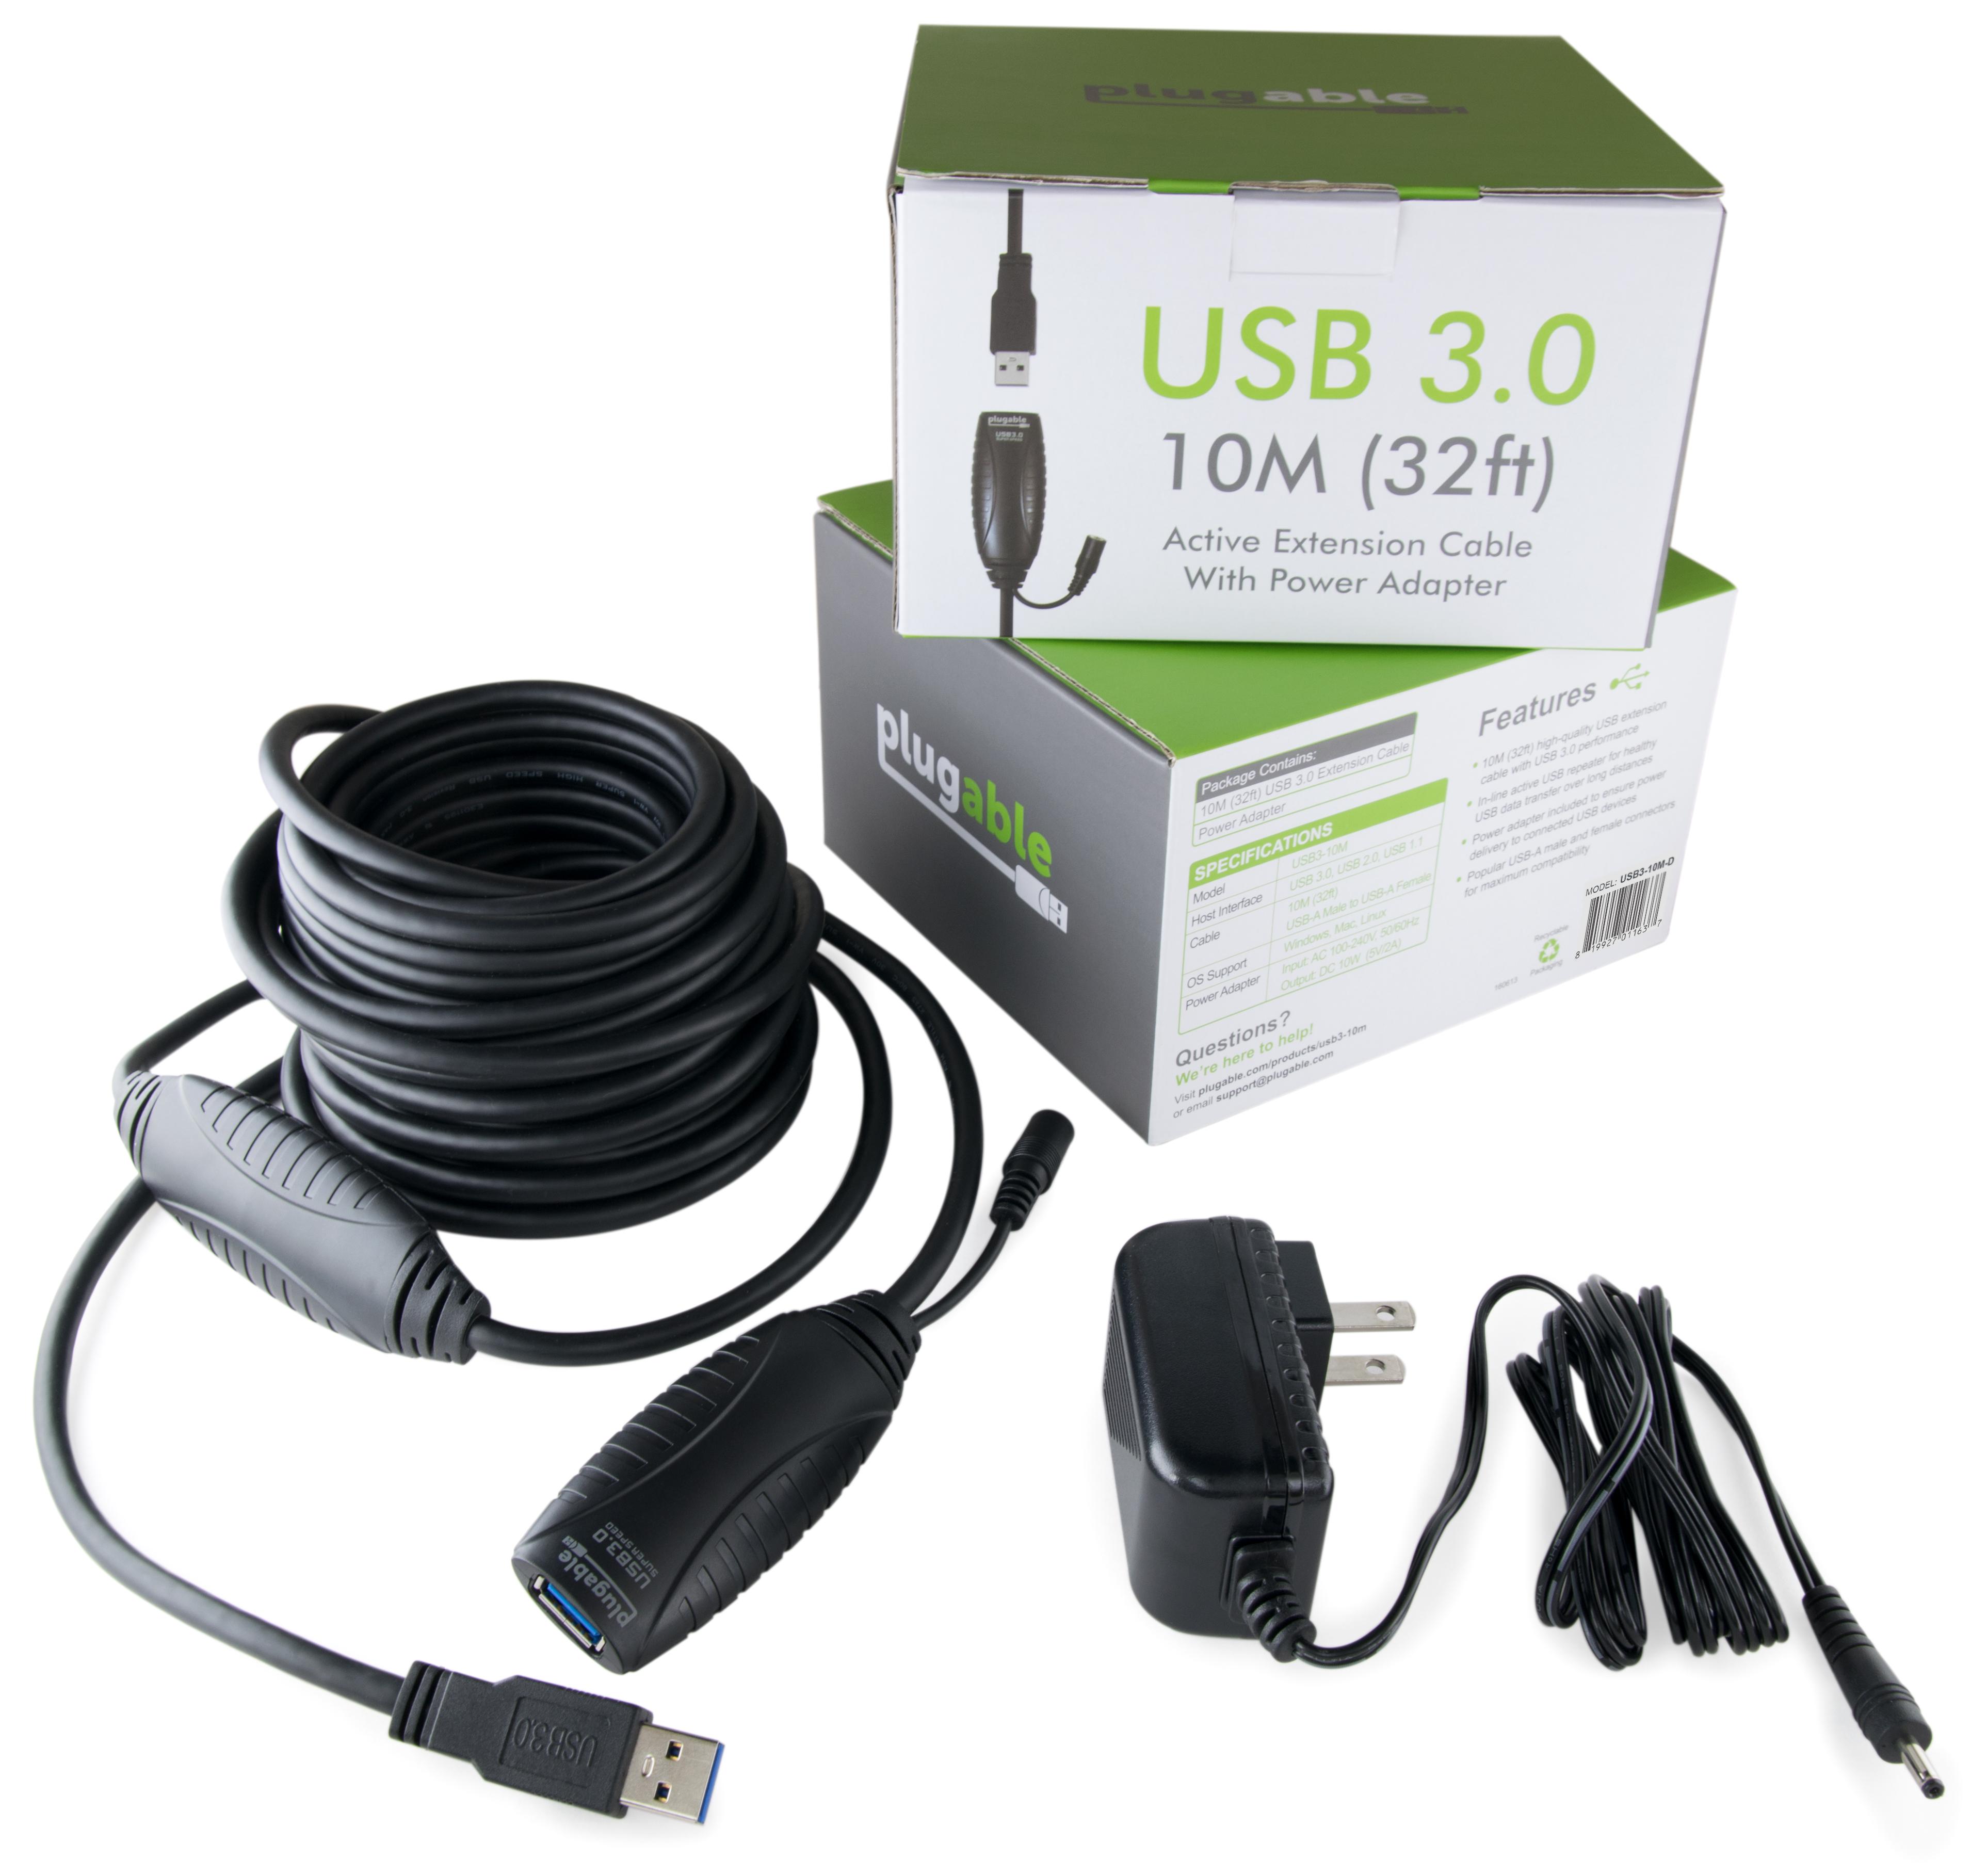 Plugable 10 Meter (32 Foot) USB 3.0 Active Extension Cable with AC Power Adapter and Back-Voltage Protection - image 5 of 5